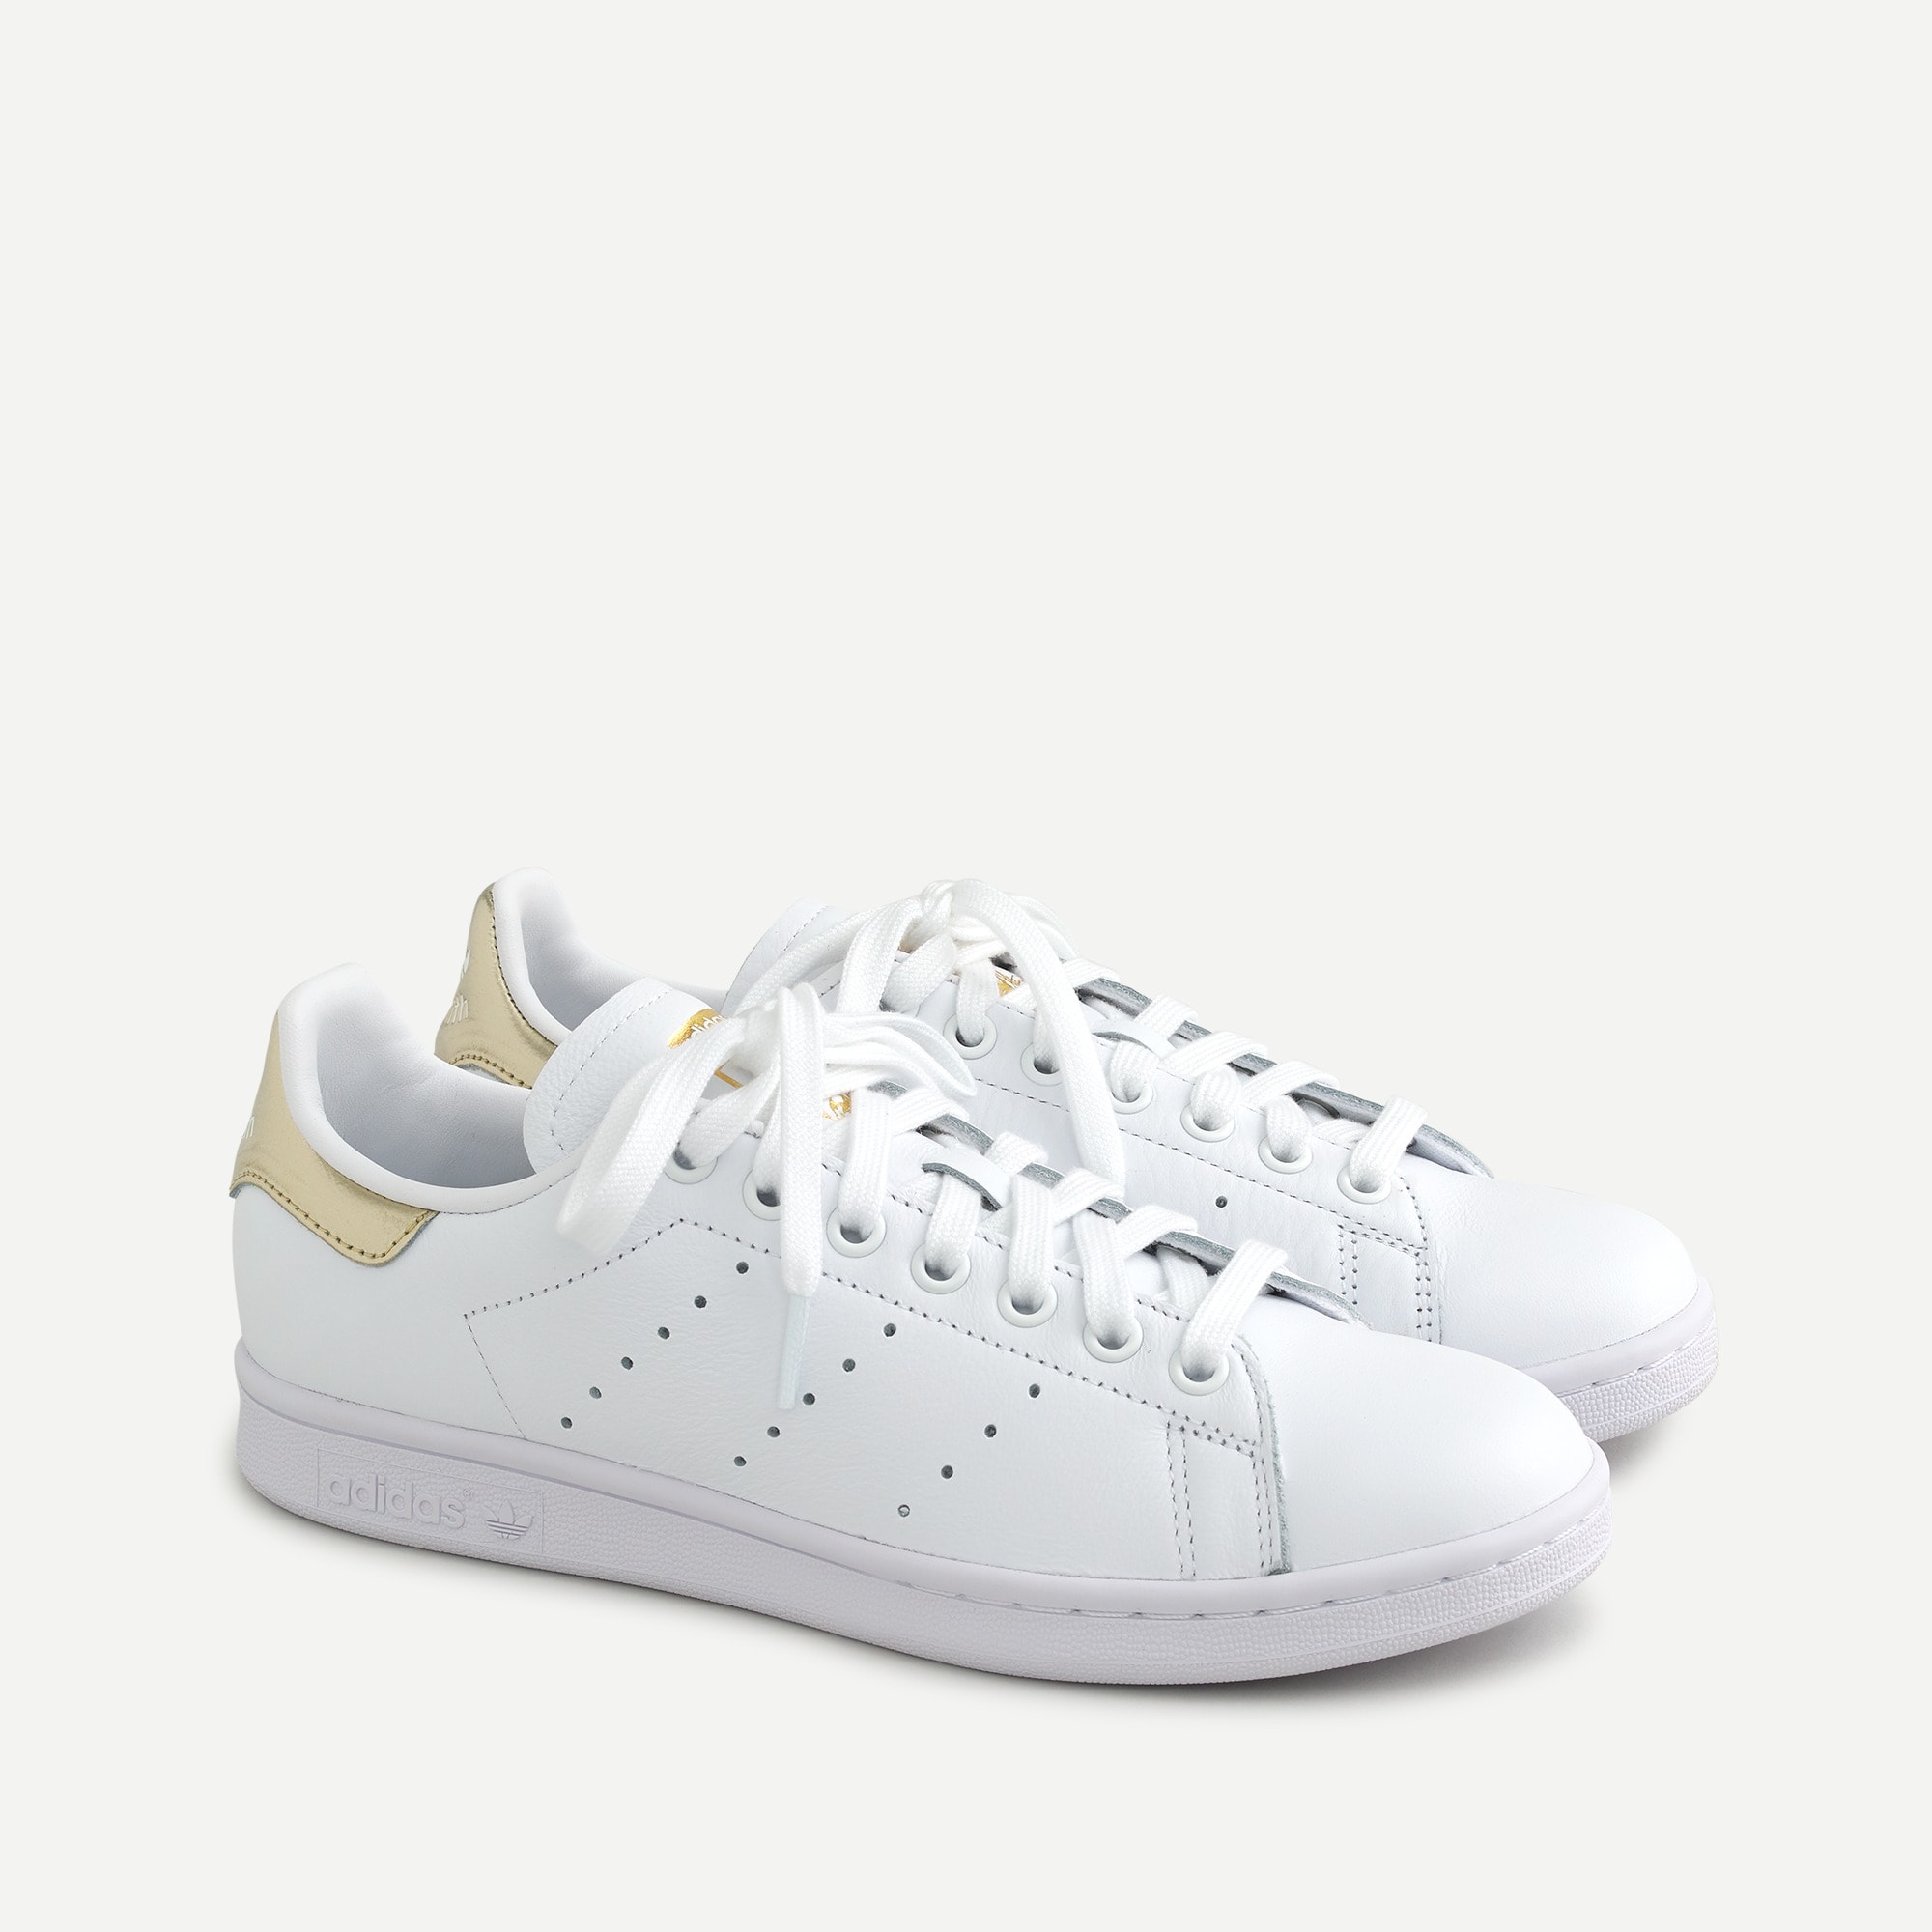 adidas stan smith sneakers womens